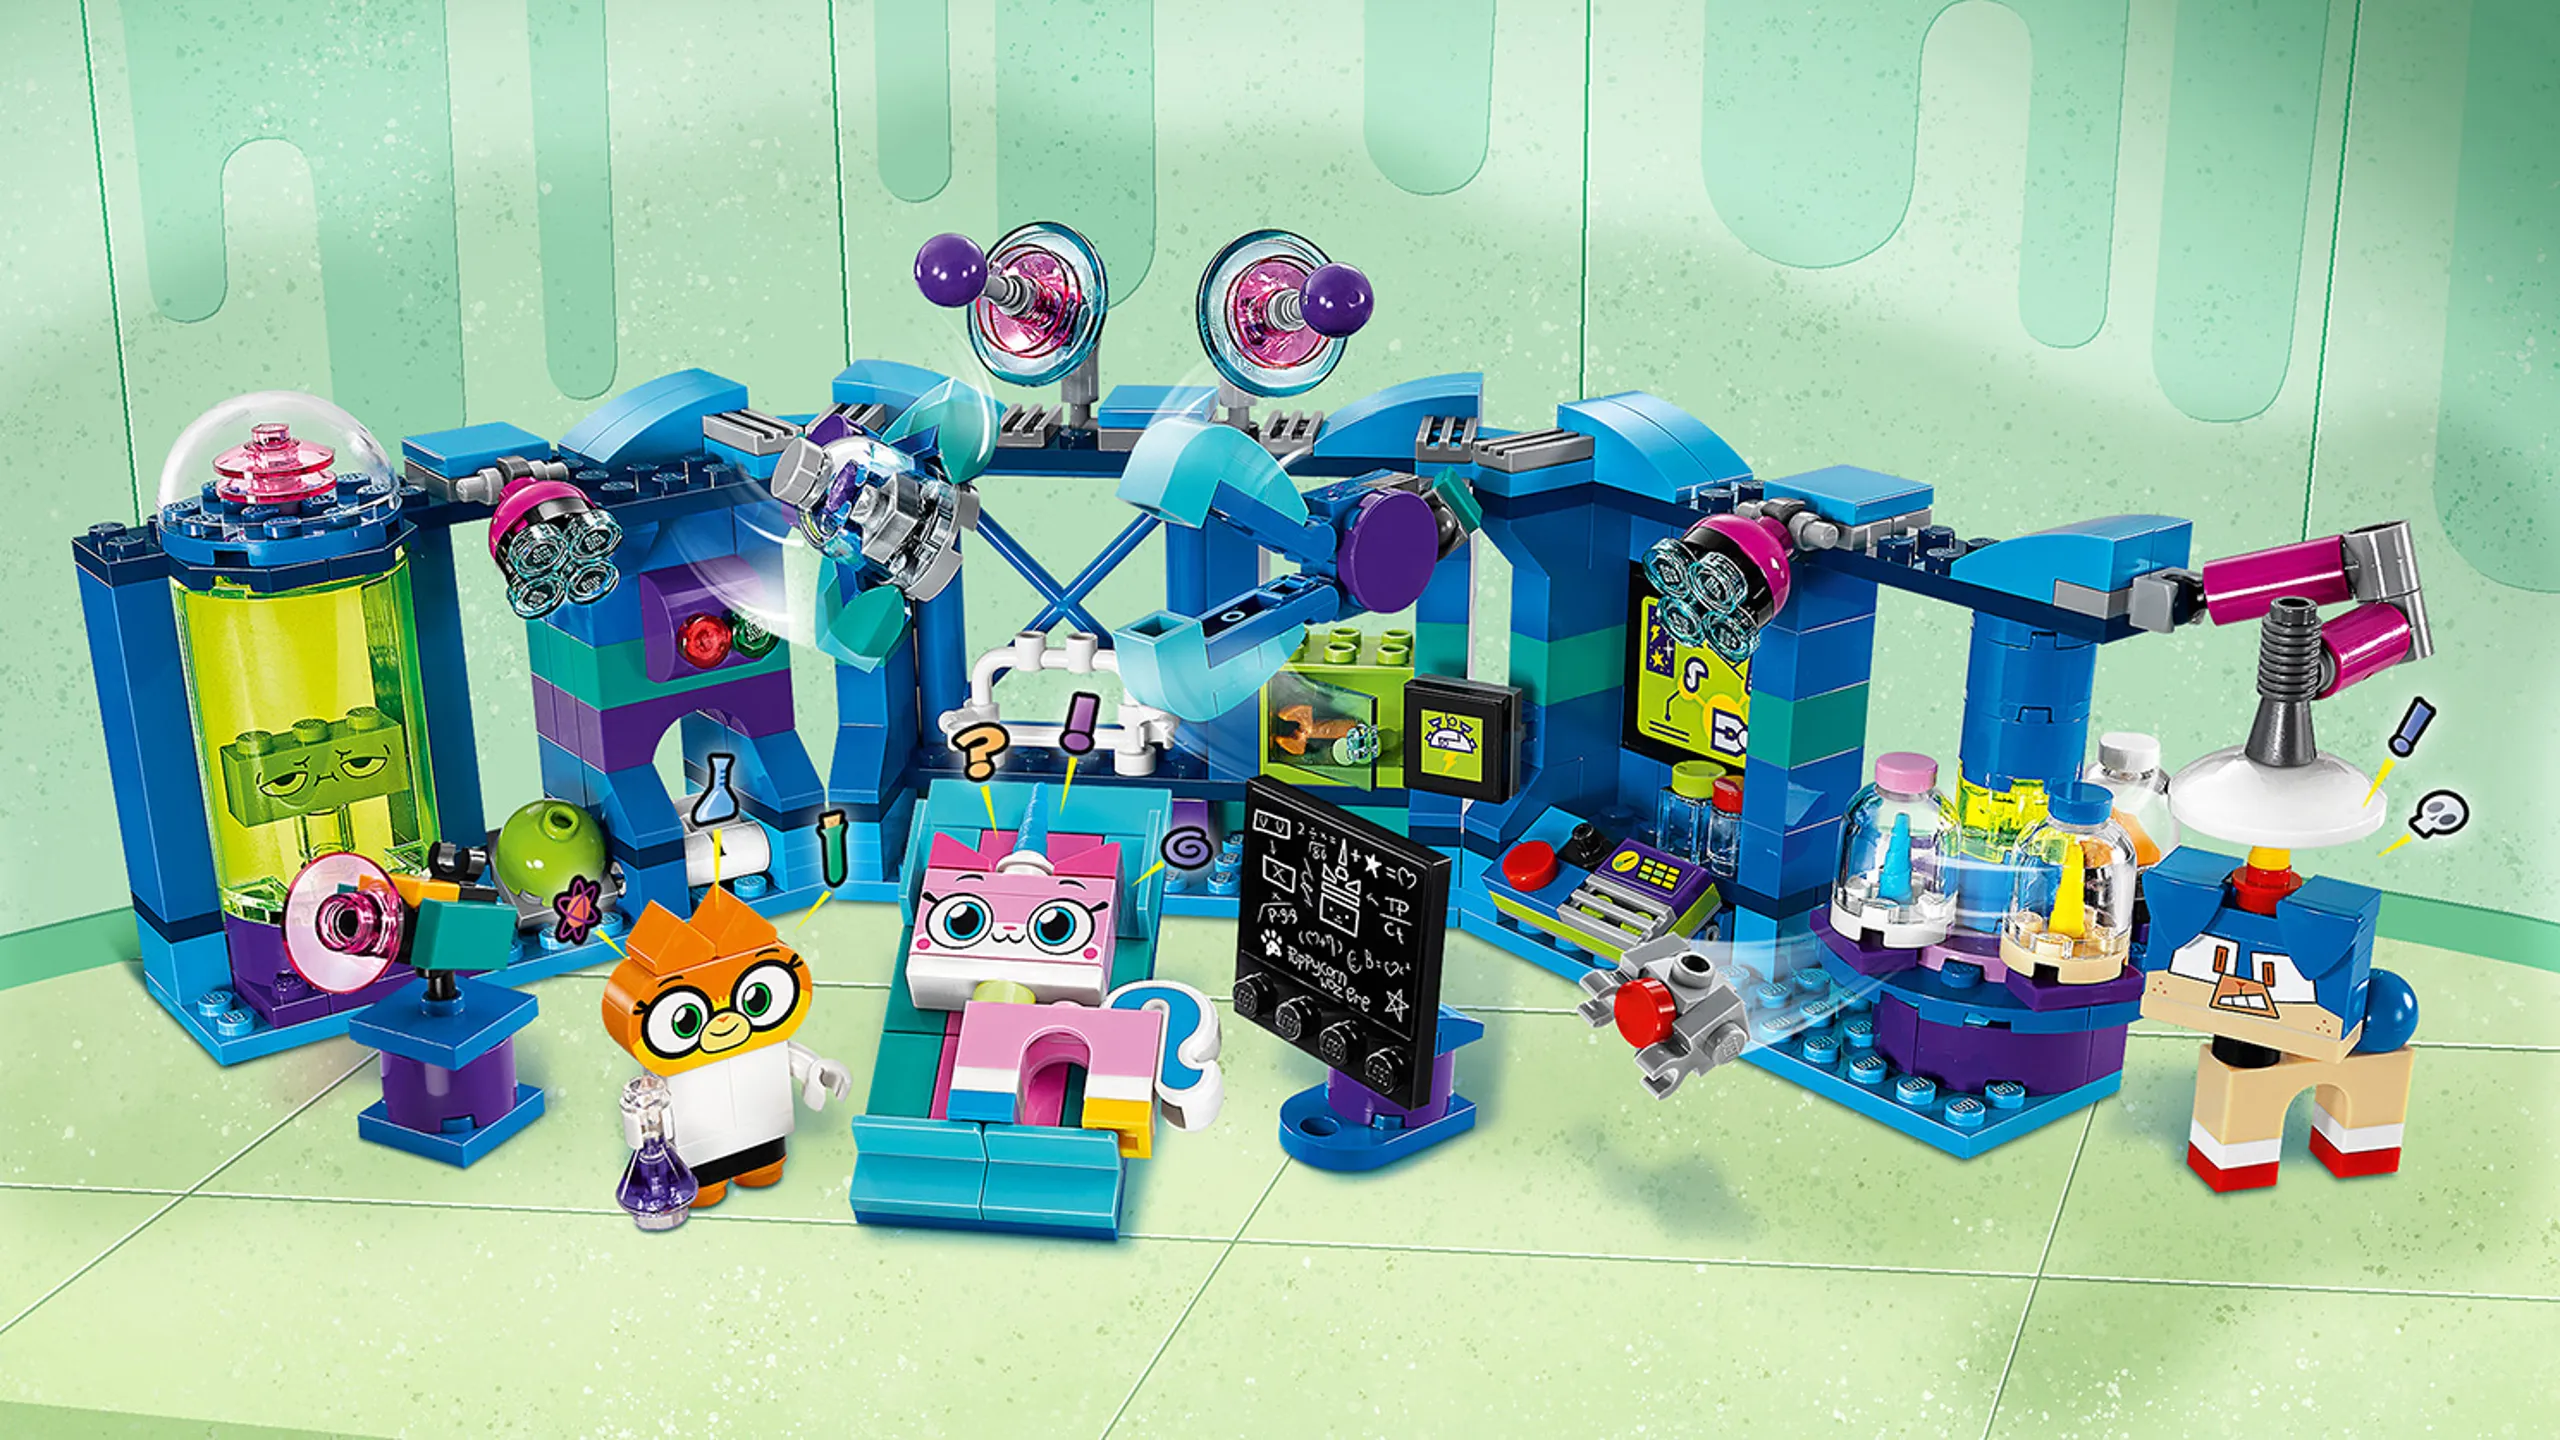 LEGO Unikitty - 41454 Dr. Fox Laboratory - Make lots of experiments with Dr. Fox to make sure there is always enough sparkle matter in Unikingdom!